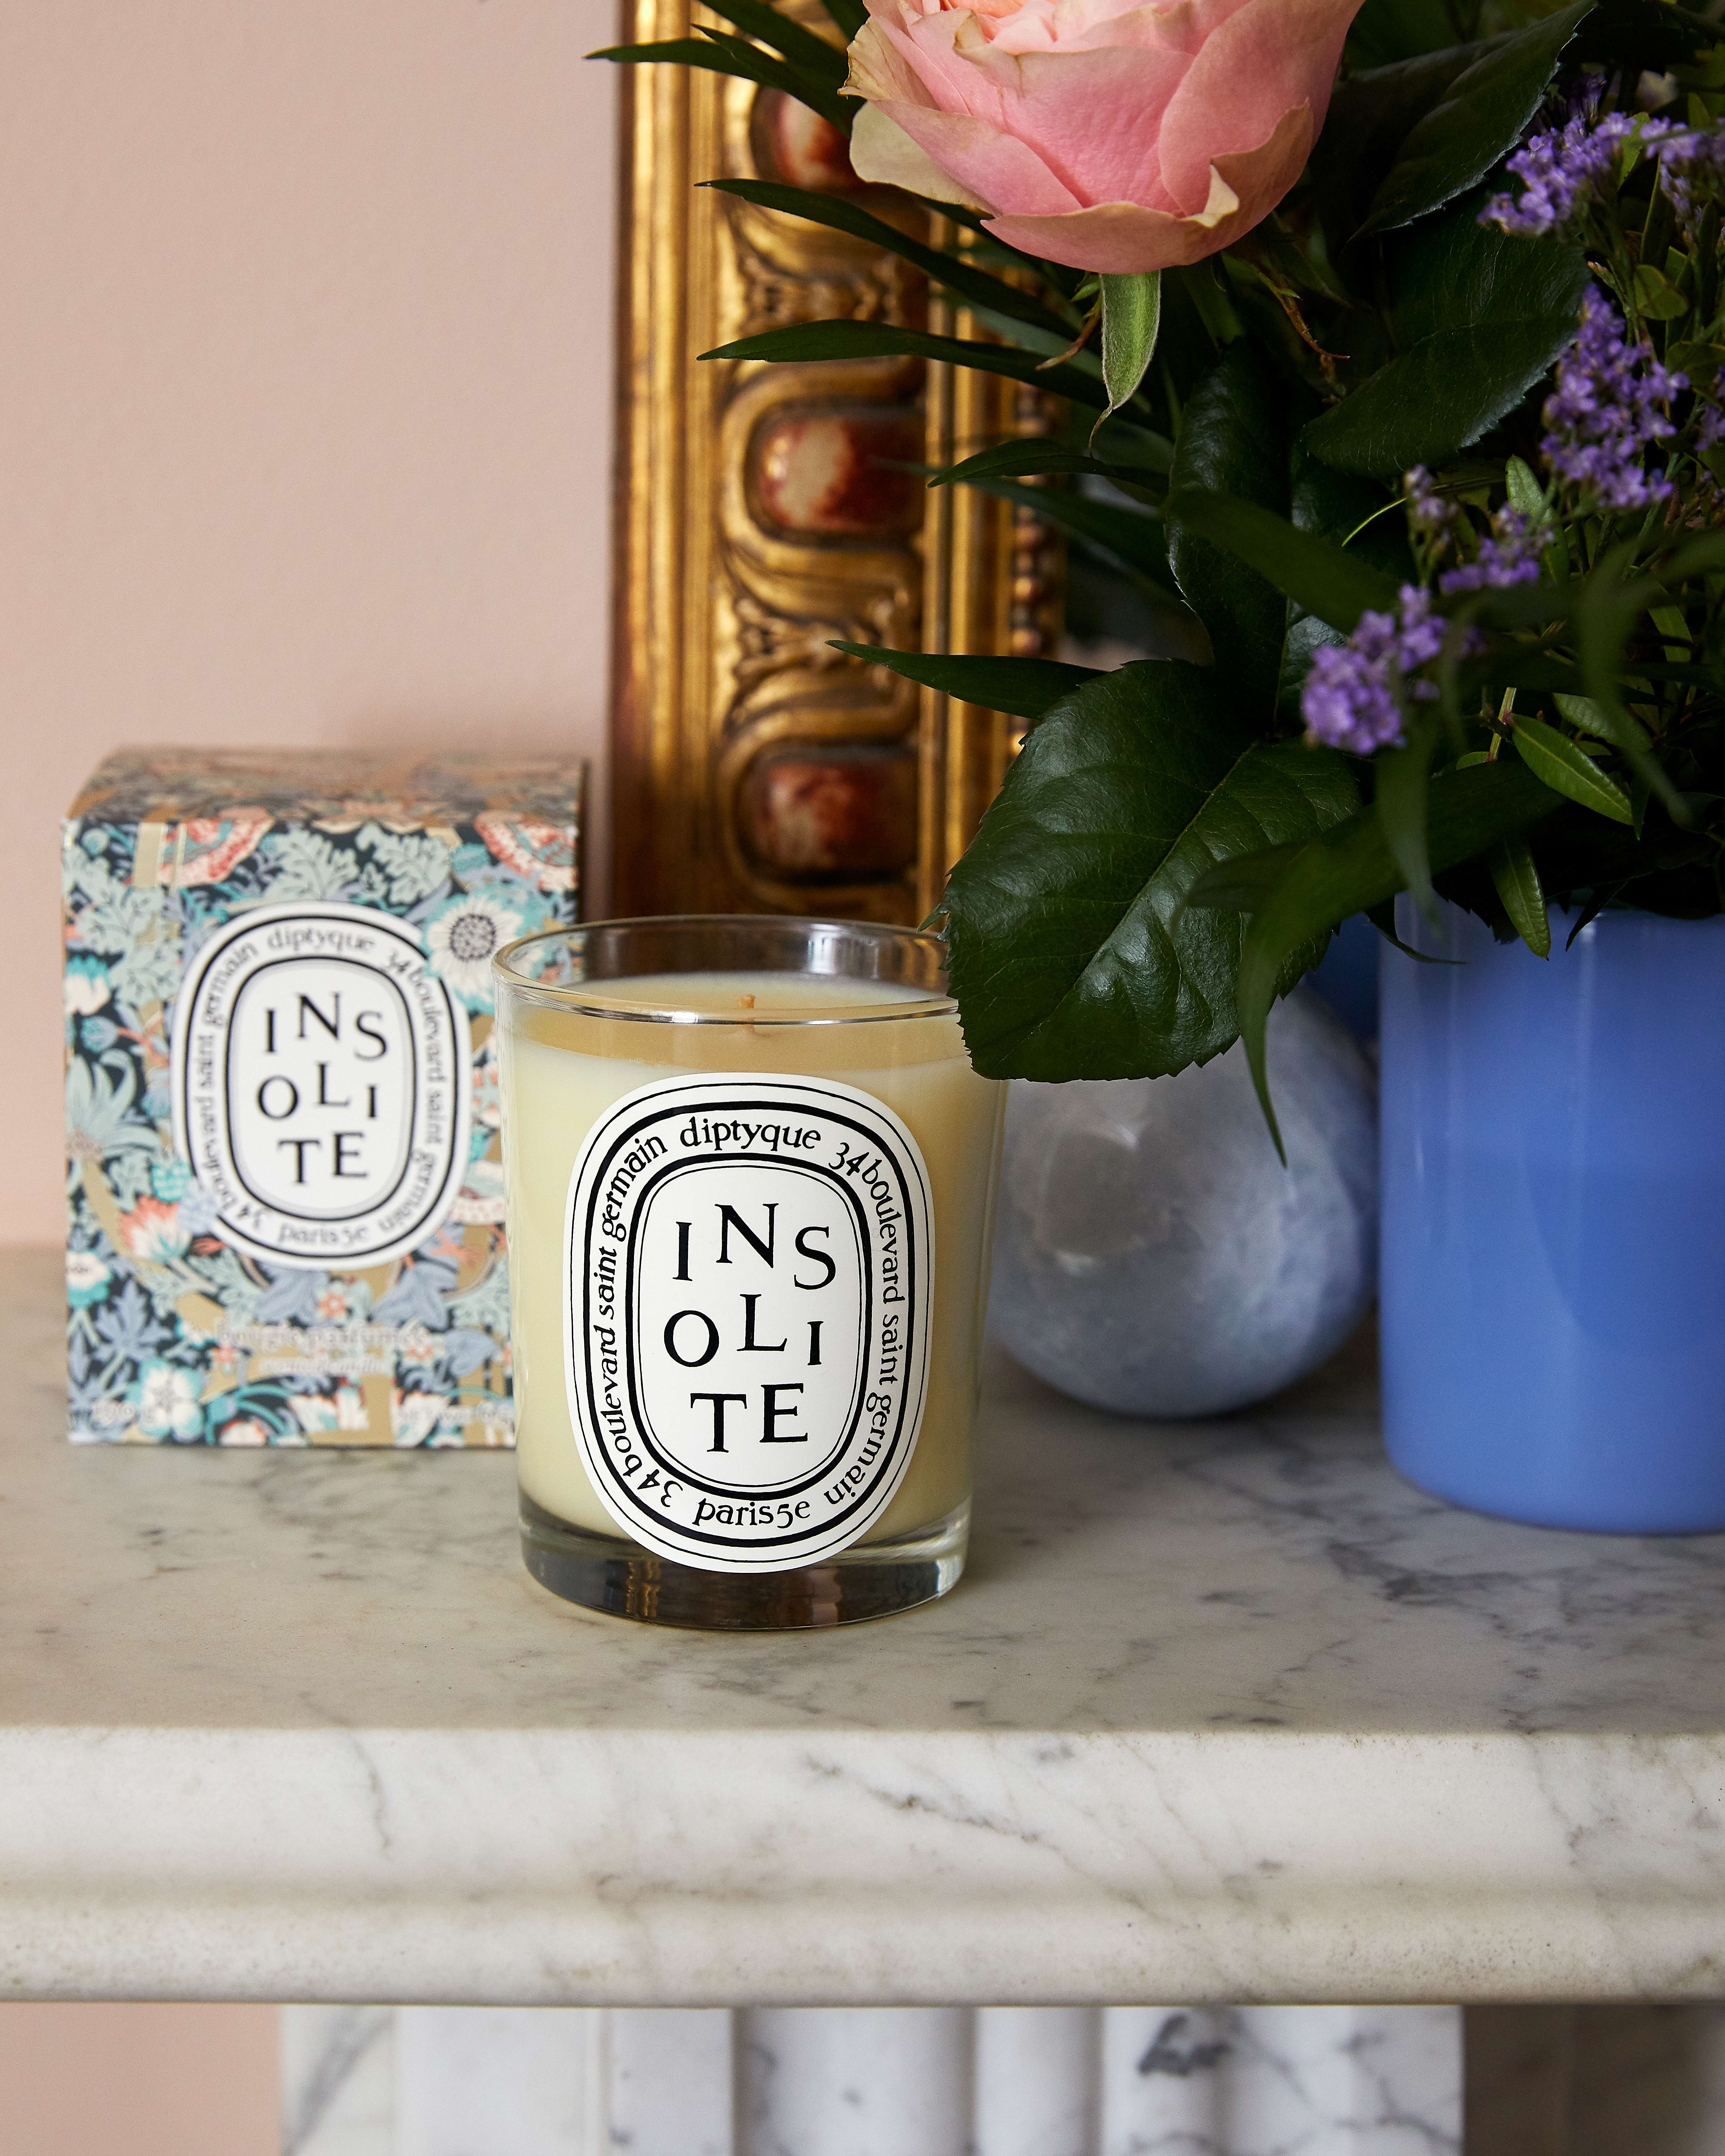 Look Who’s Back: Diptyque Limited Edition Insolite Candle